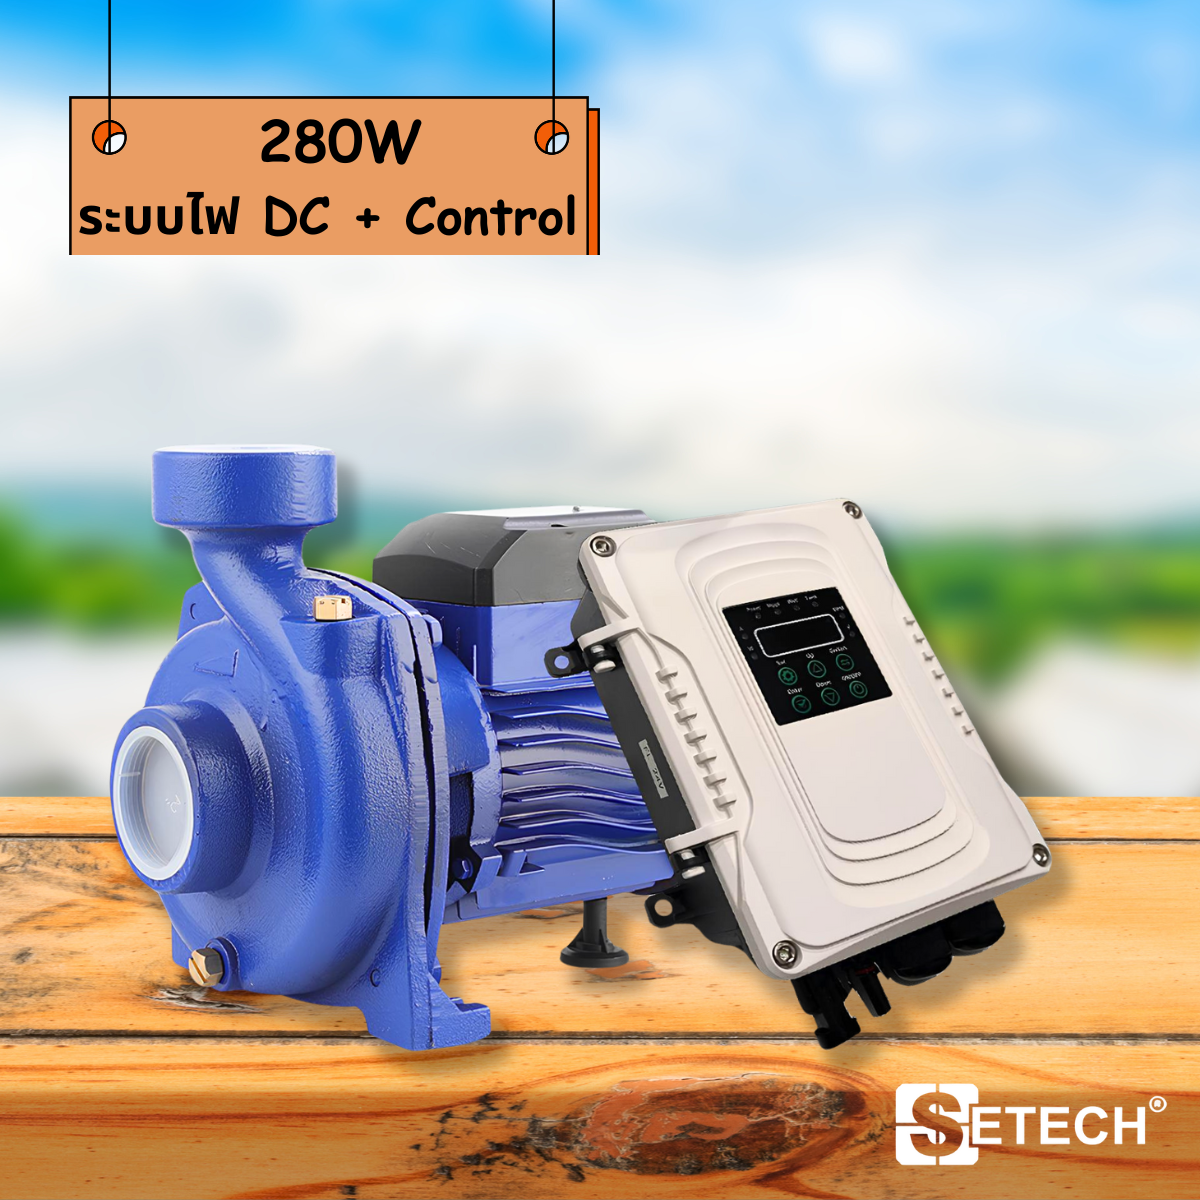 Centrifugal pump for solar cells and DC power systems + Control, 1 inch pipe (280W) SETECH